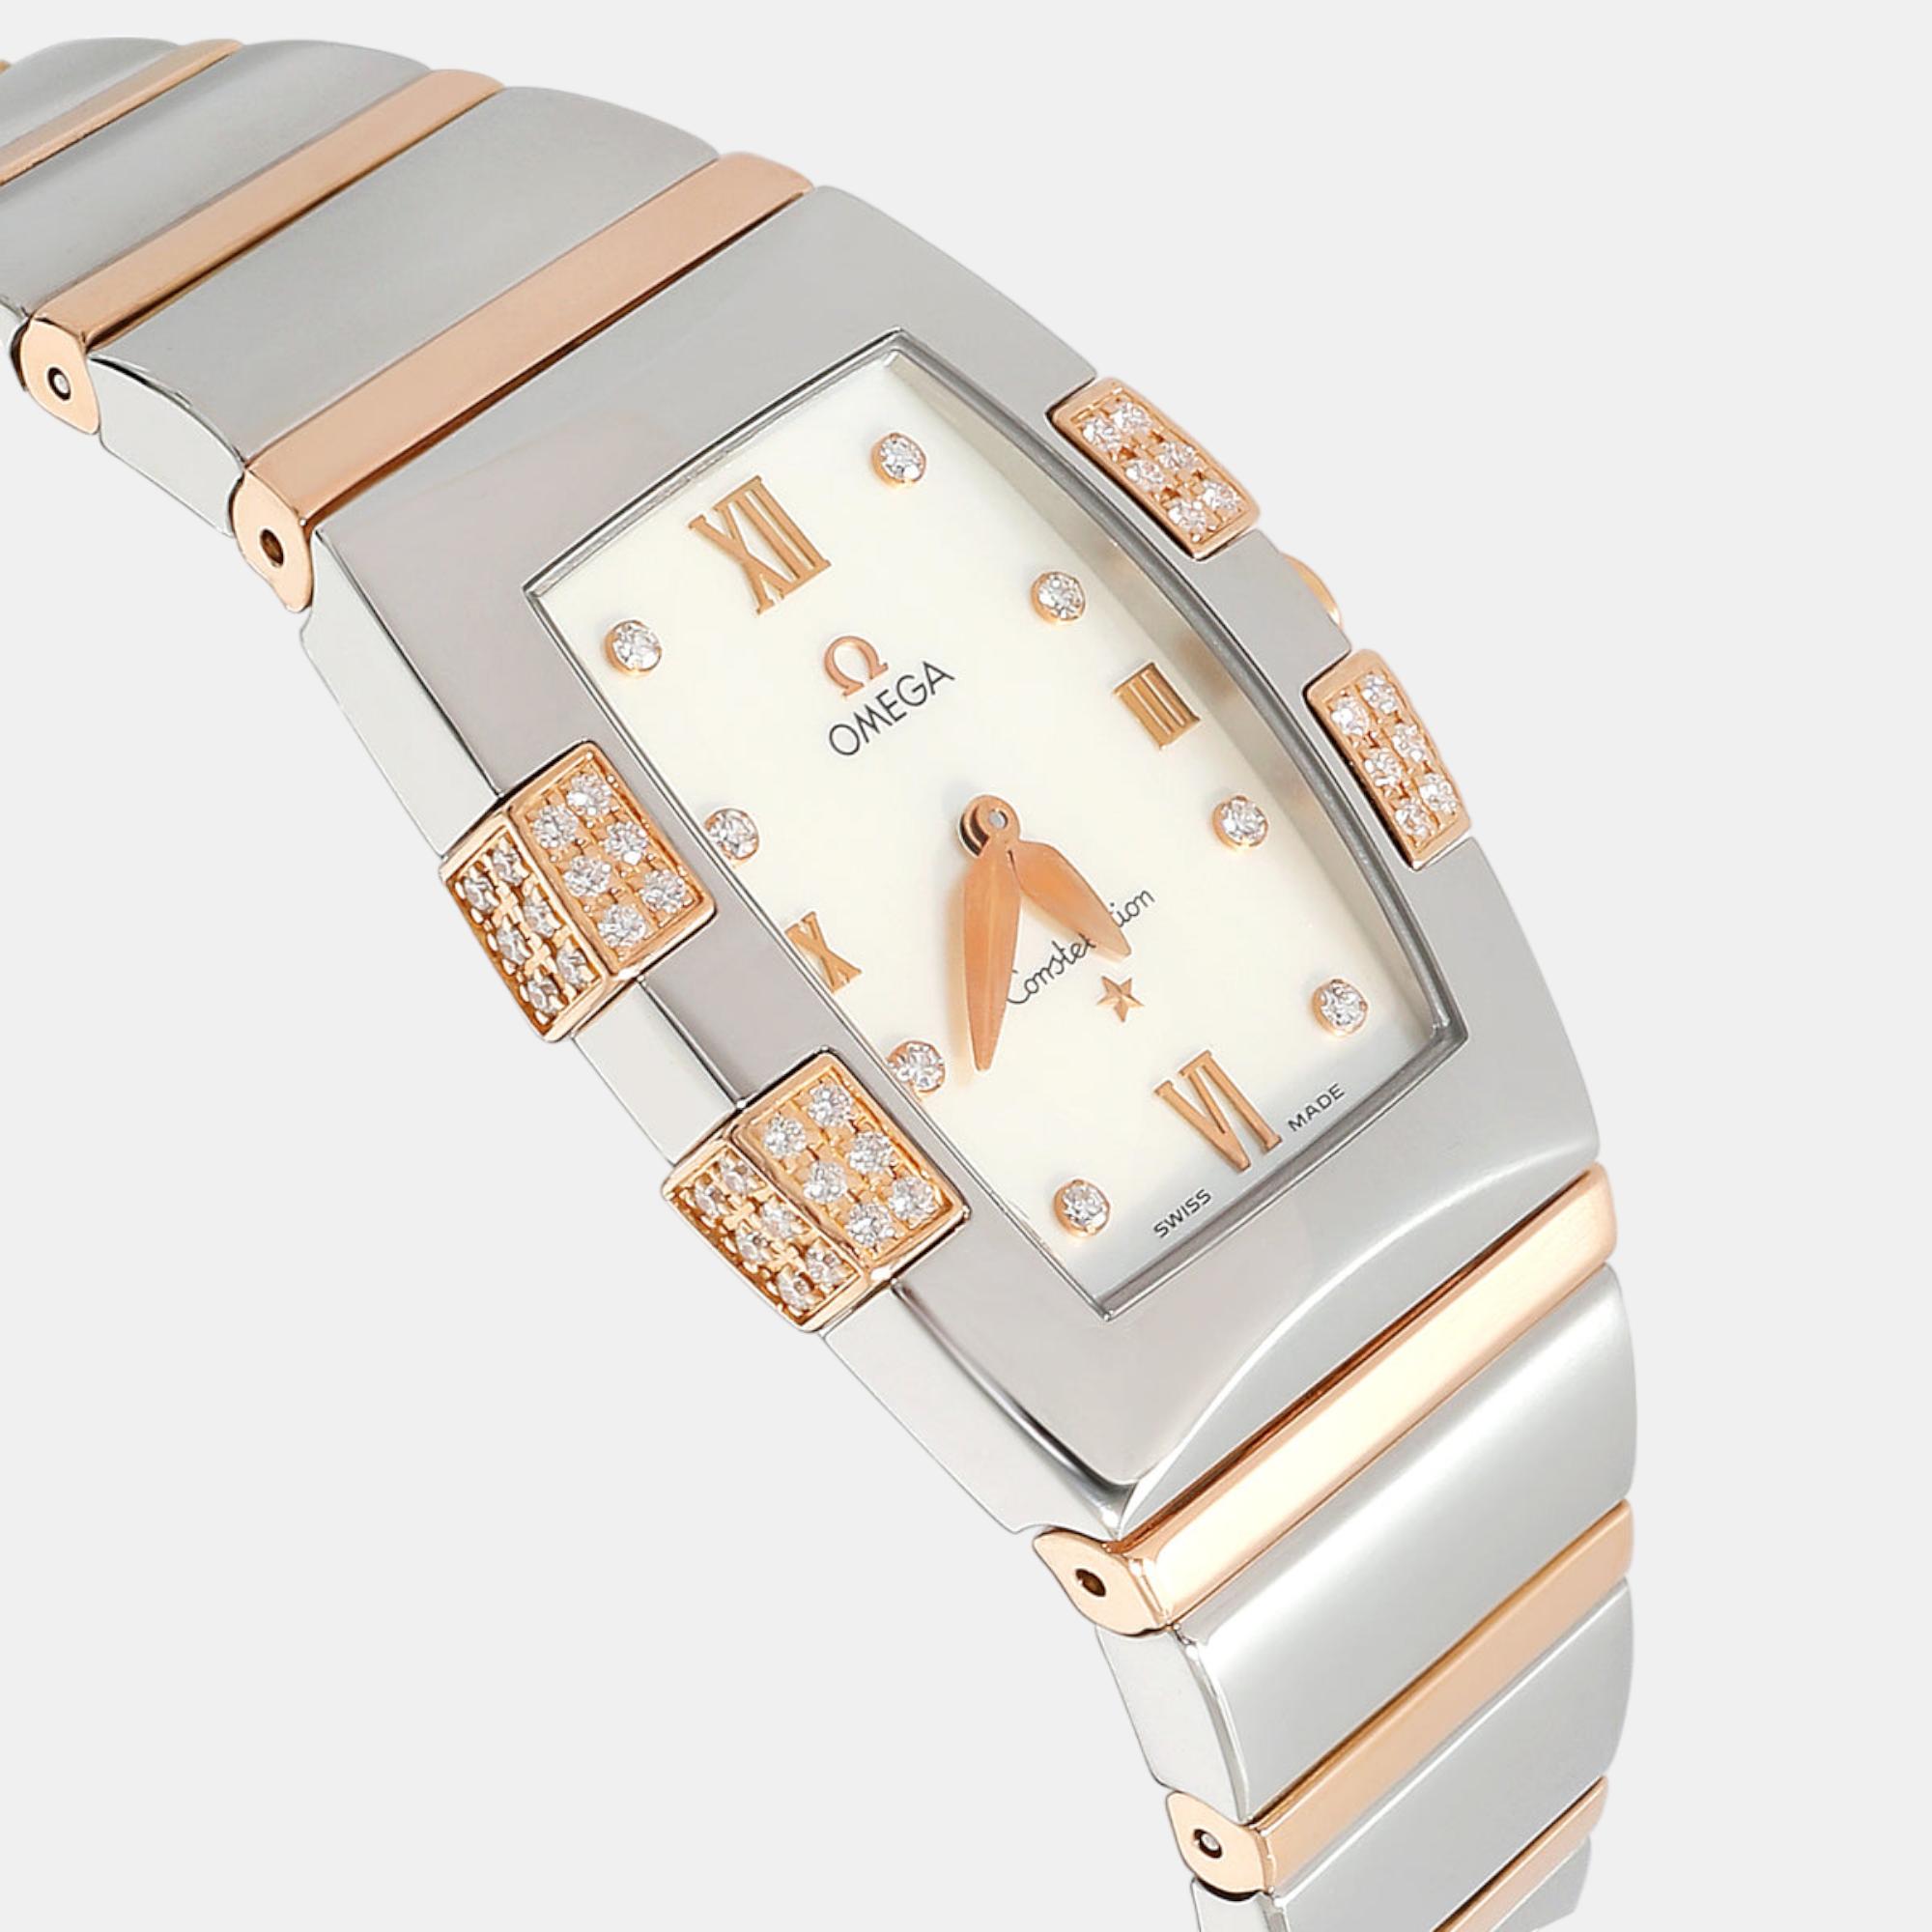 Omega White Mother Of Pearl 18k Rose Gold And Stainless Steel Constellation Quadrella 1286.75 Quartz Women's Wristwatch 25 Mm